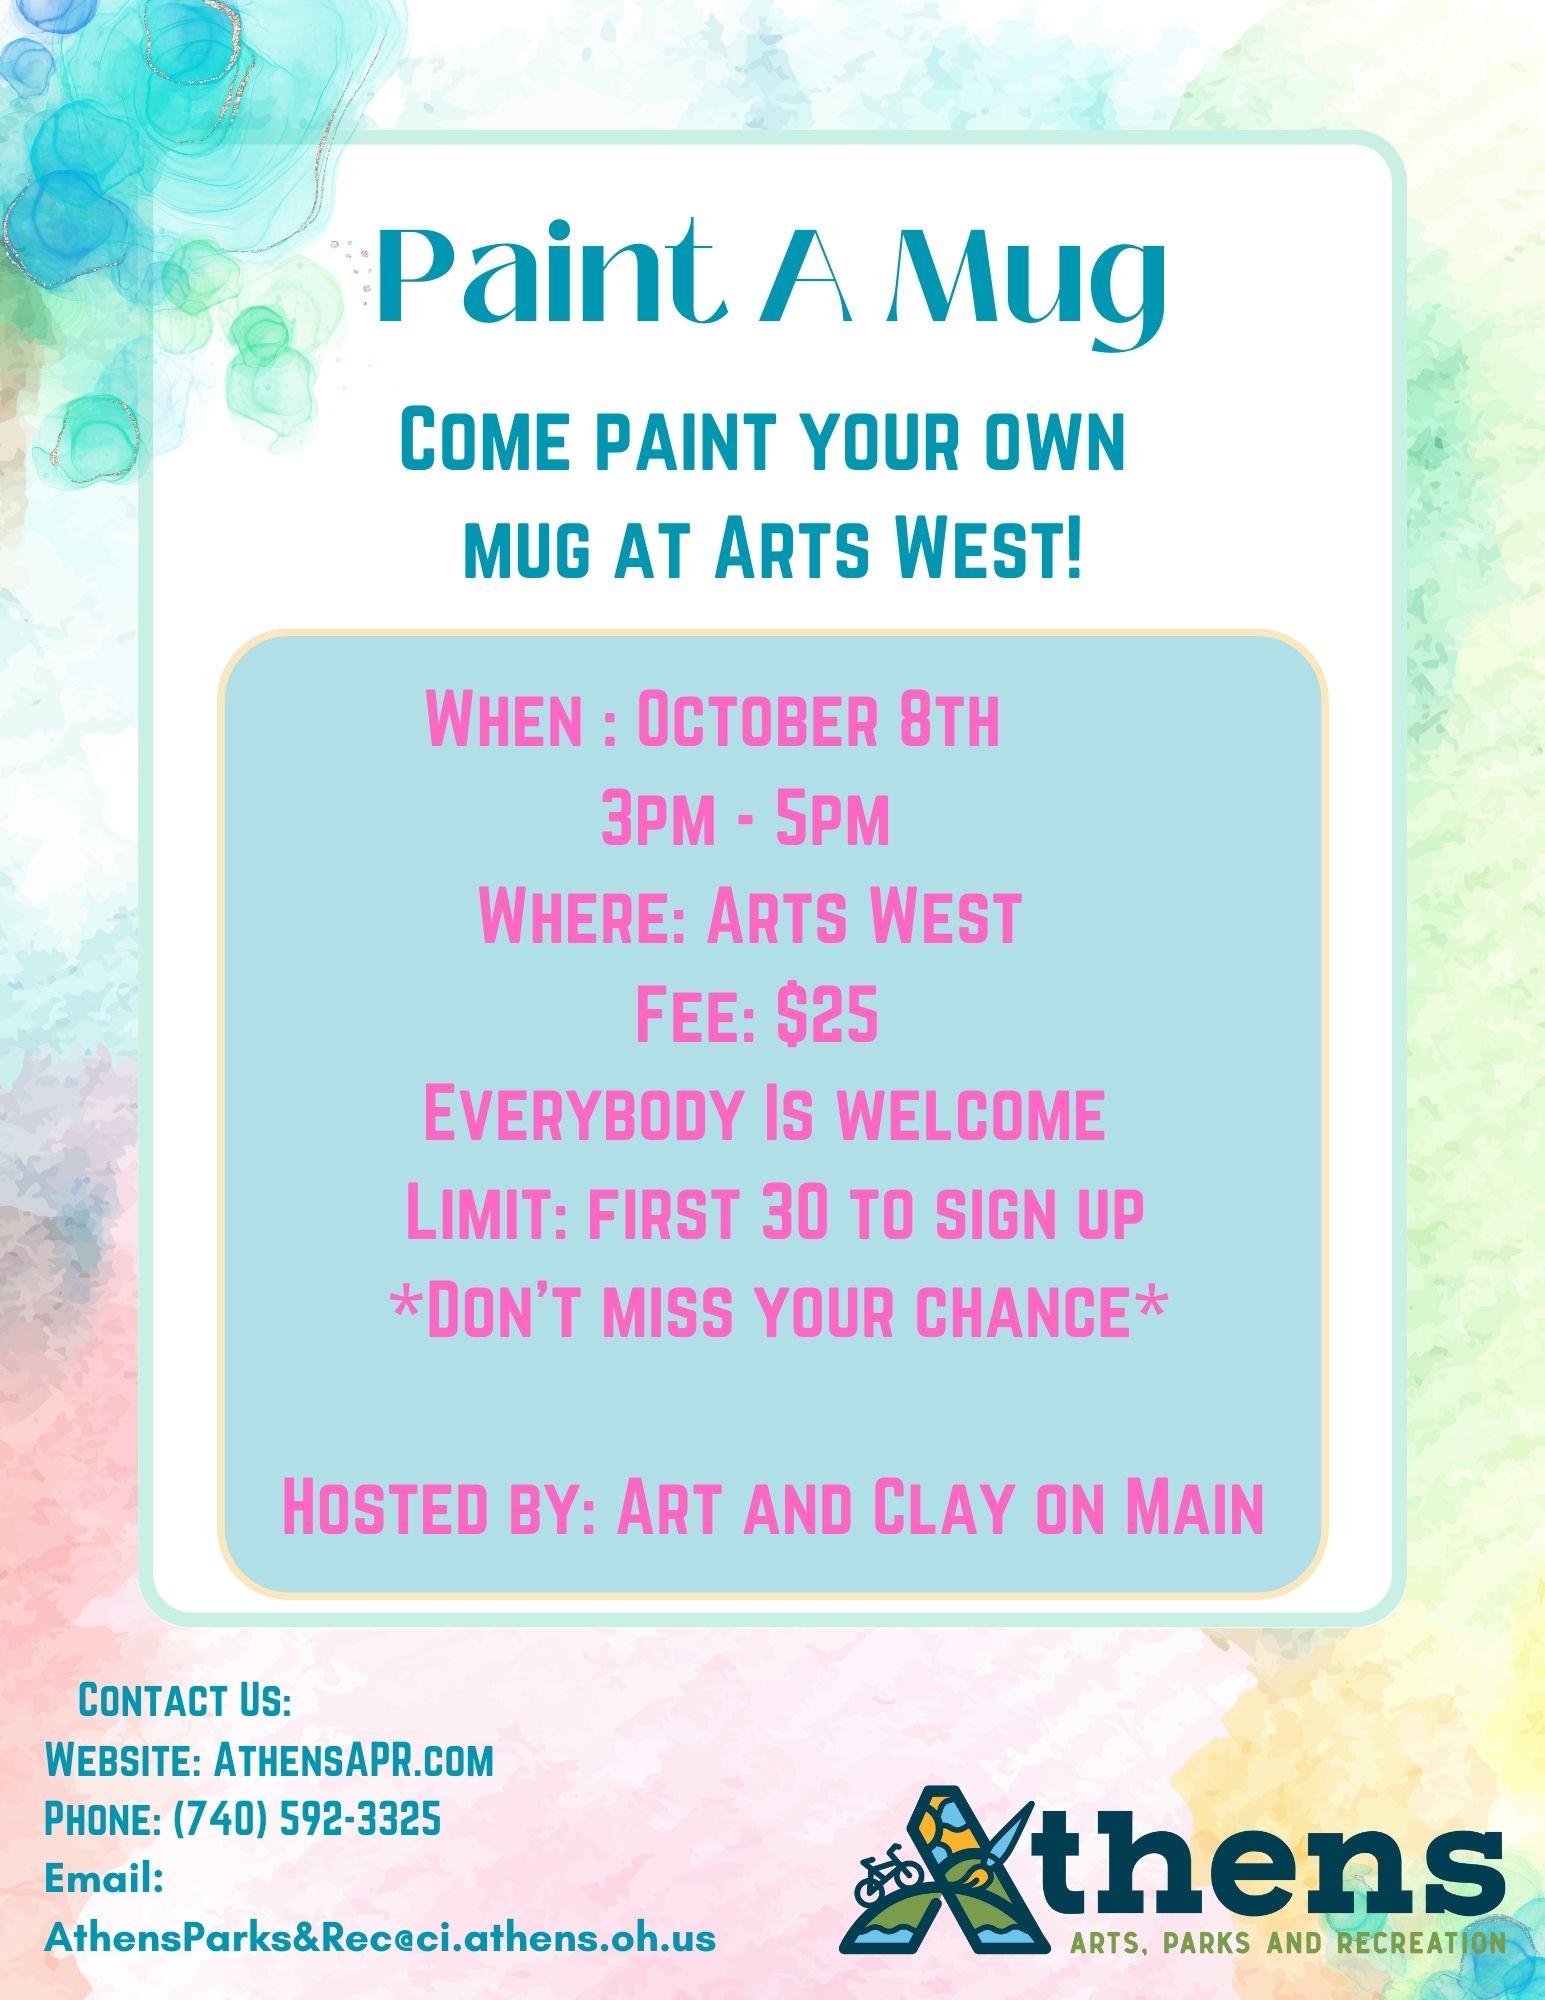 A flyer for a mug painting class.